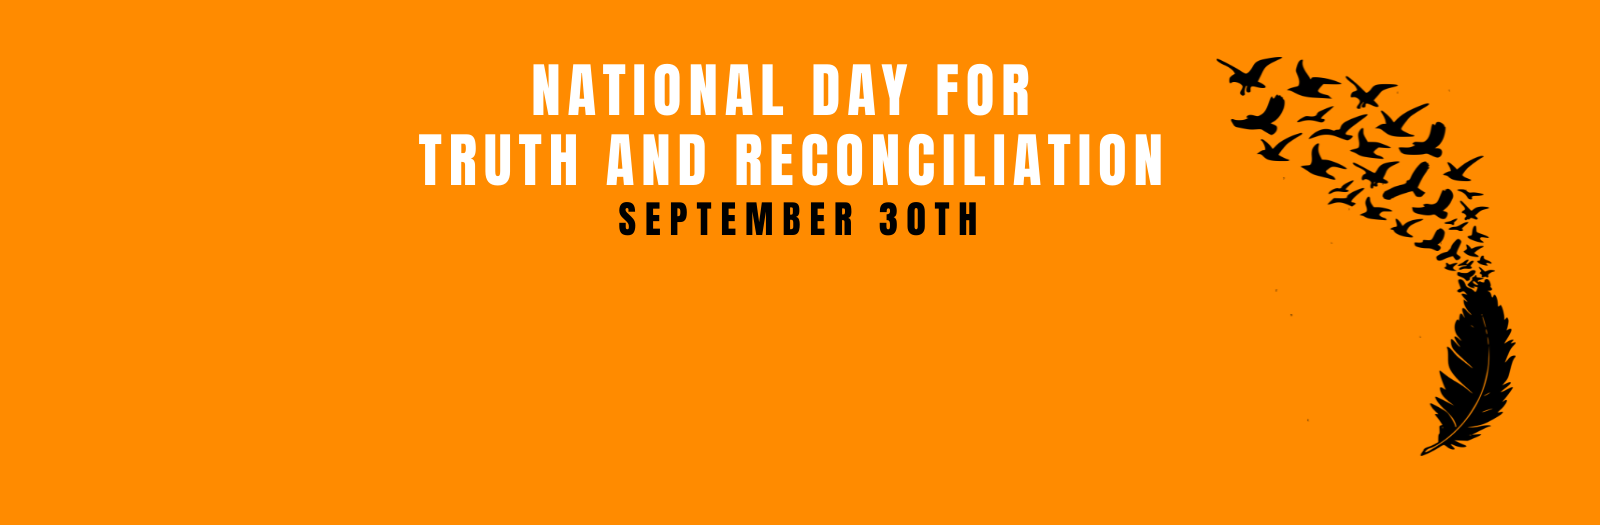 Orange background with a black feather and birds for National Day for Truth and Reconciliation